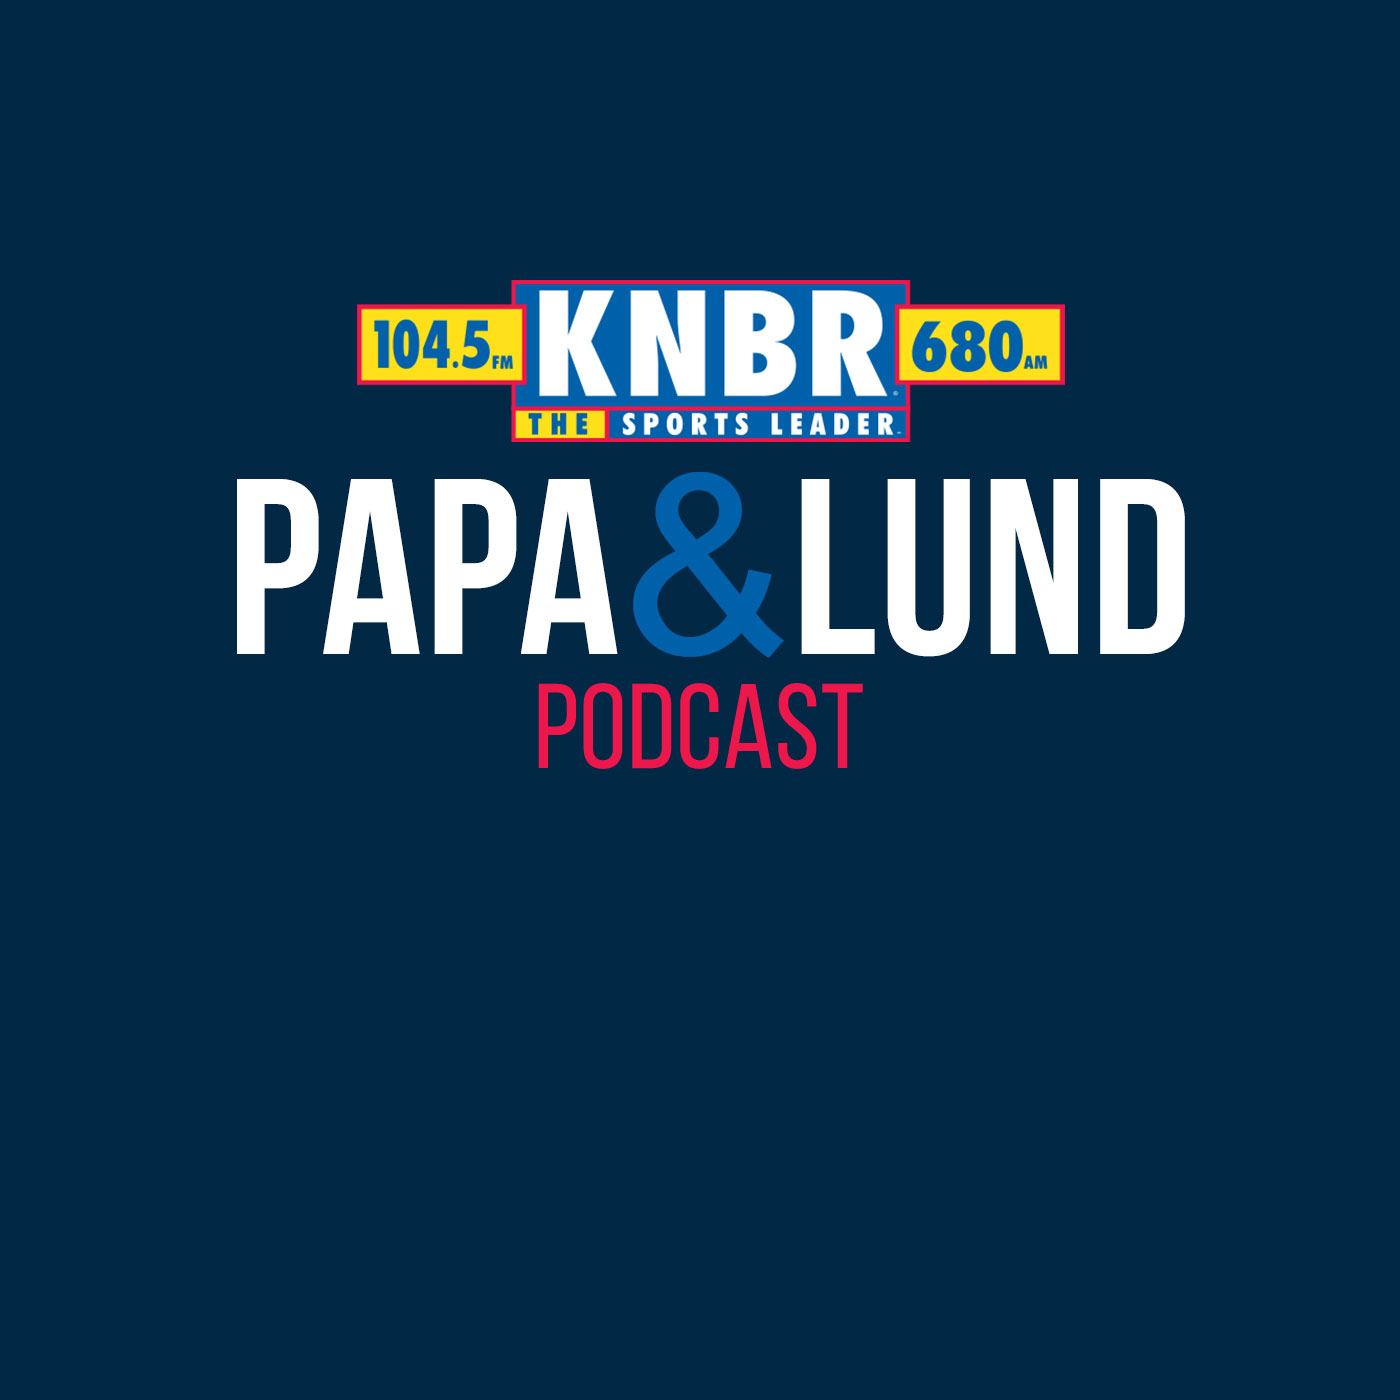 5-14 Eric Hasseltine joins P&L to discuss the season finale Warriors vs Grizzlies matchup